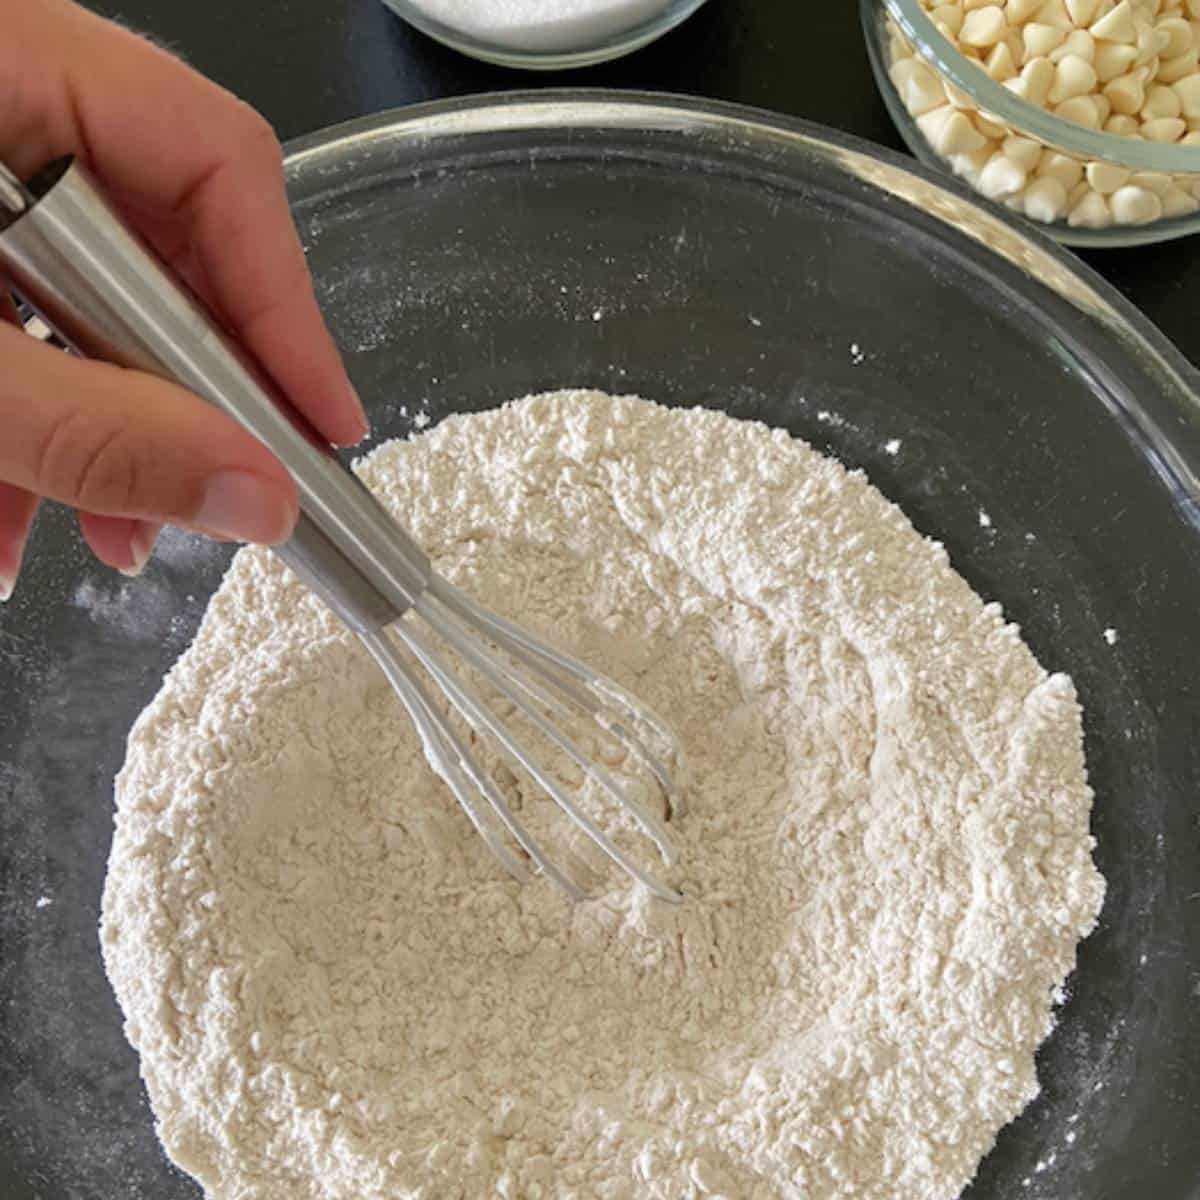 Hand mixing dry ingredients for muffins.